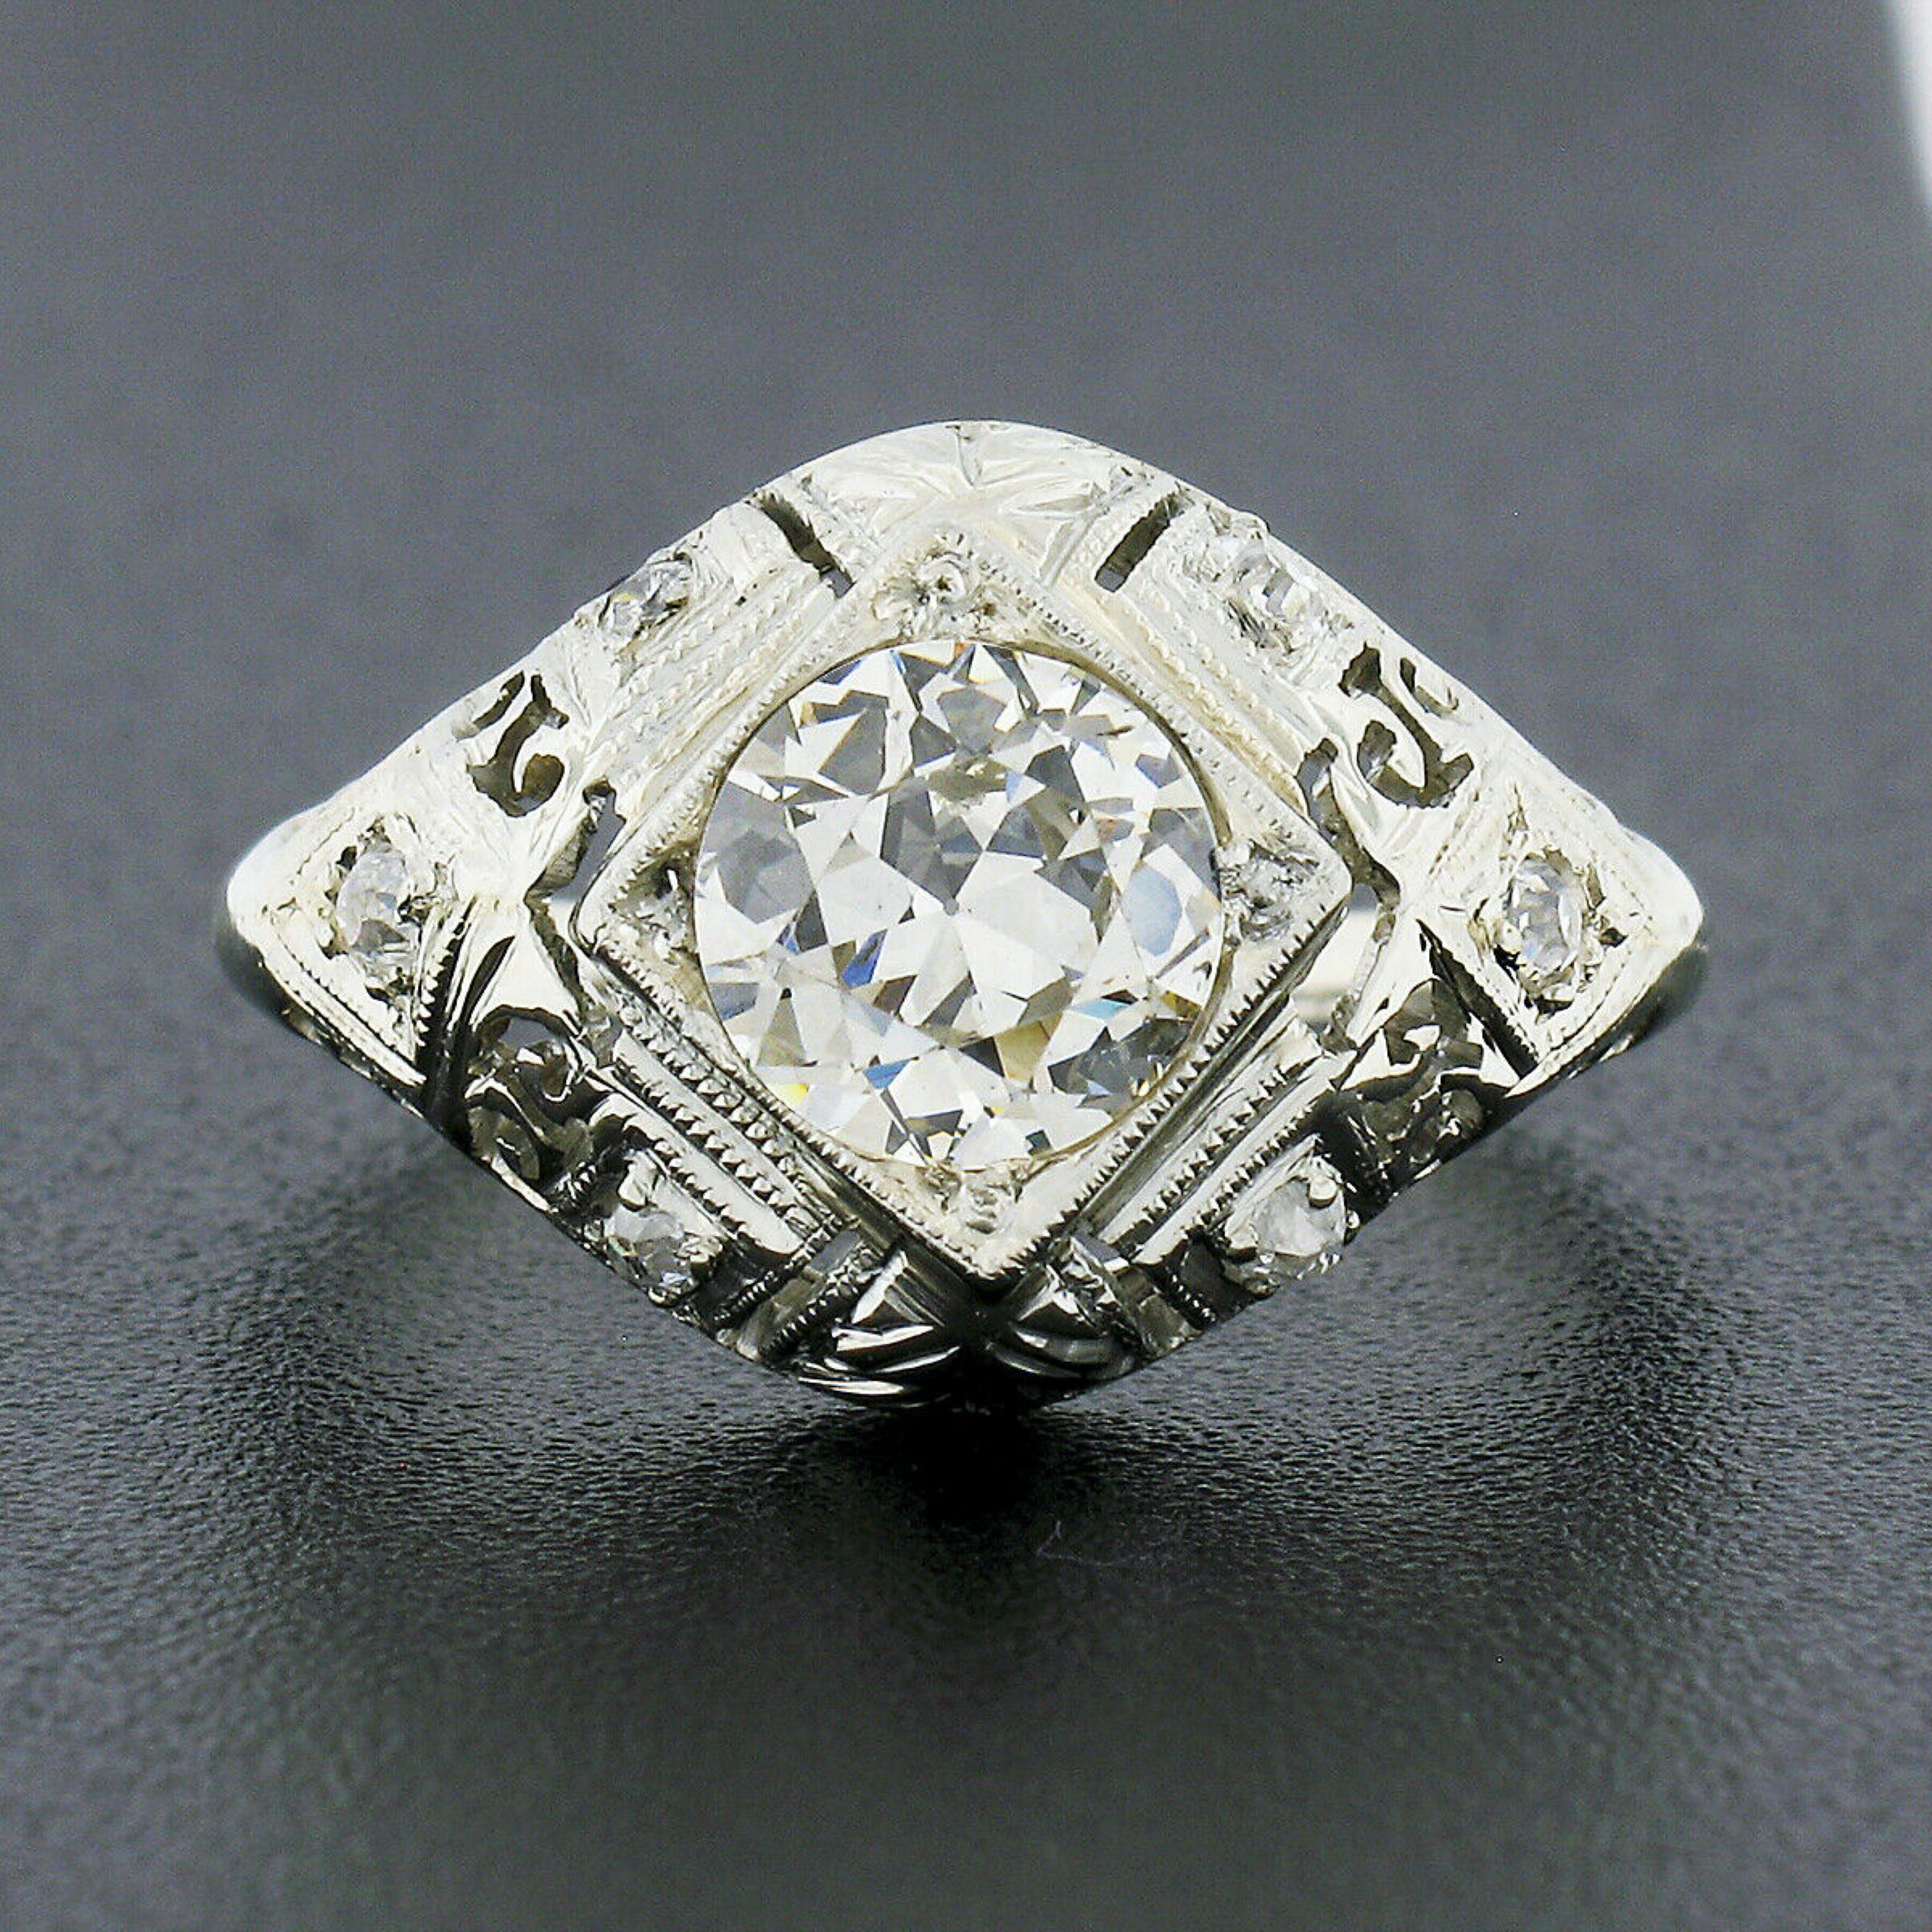 You are looking at a truly magnificent and gorgeous art deco period engagement ring that is crafted in solid 18k white gold featuring a stunning circular brilliant (old European) cut diamond solitaire neatly bead set at its center. The lively